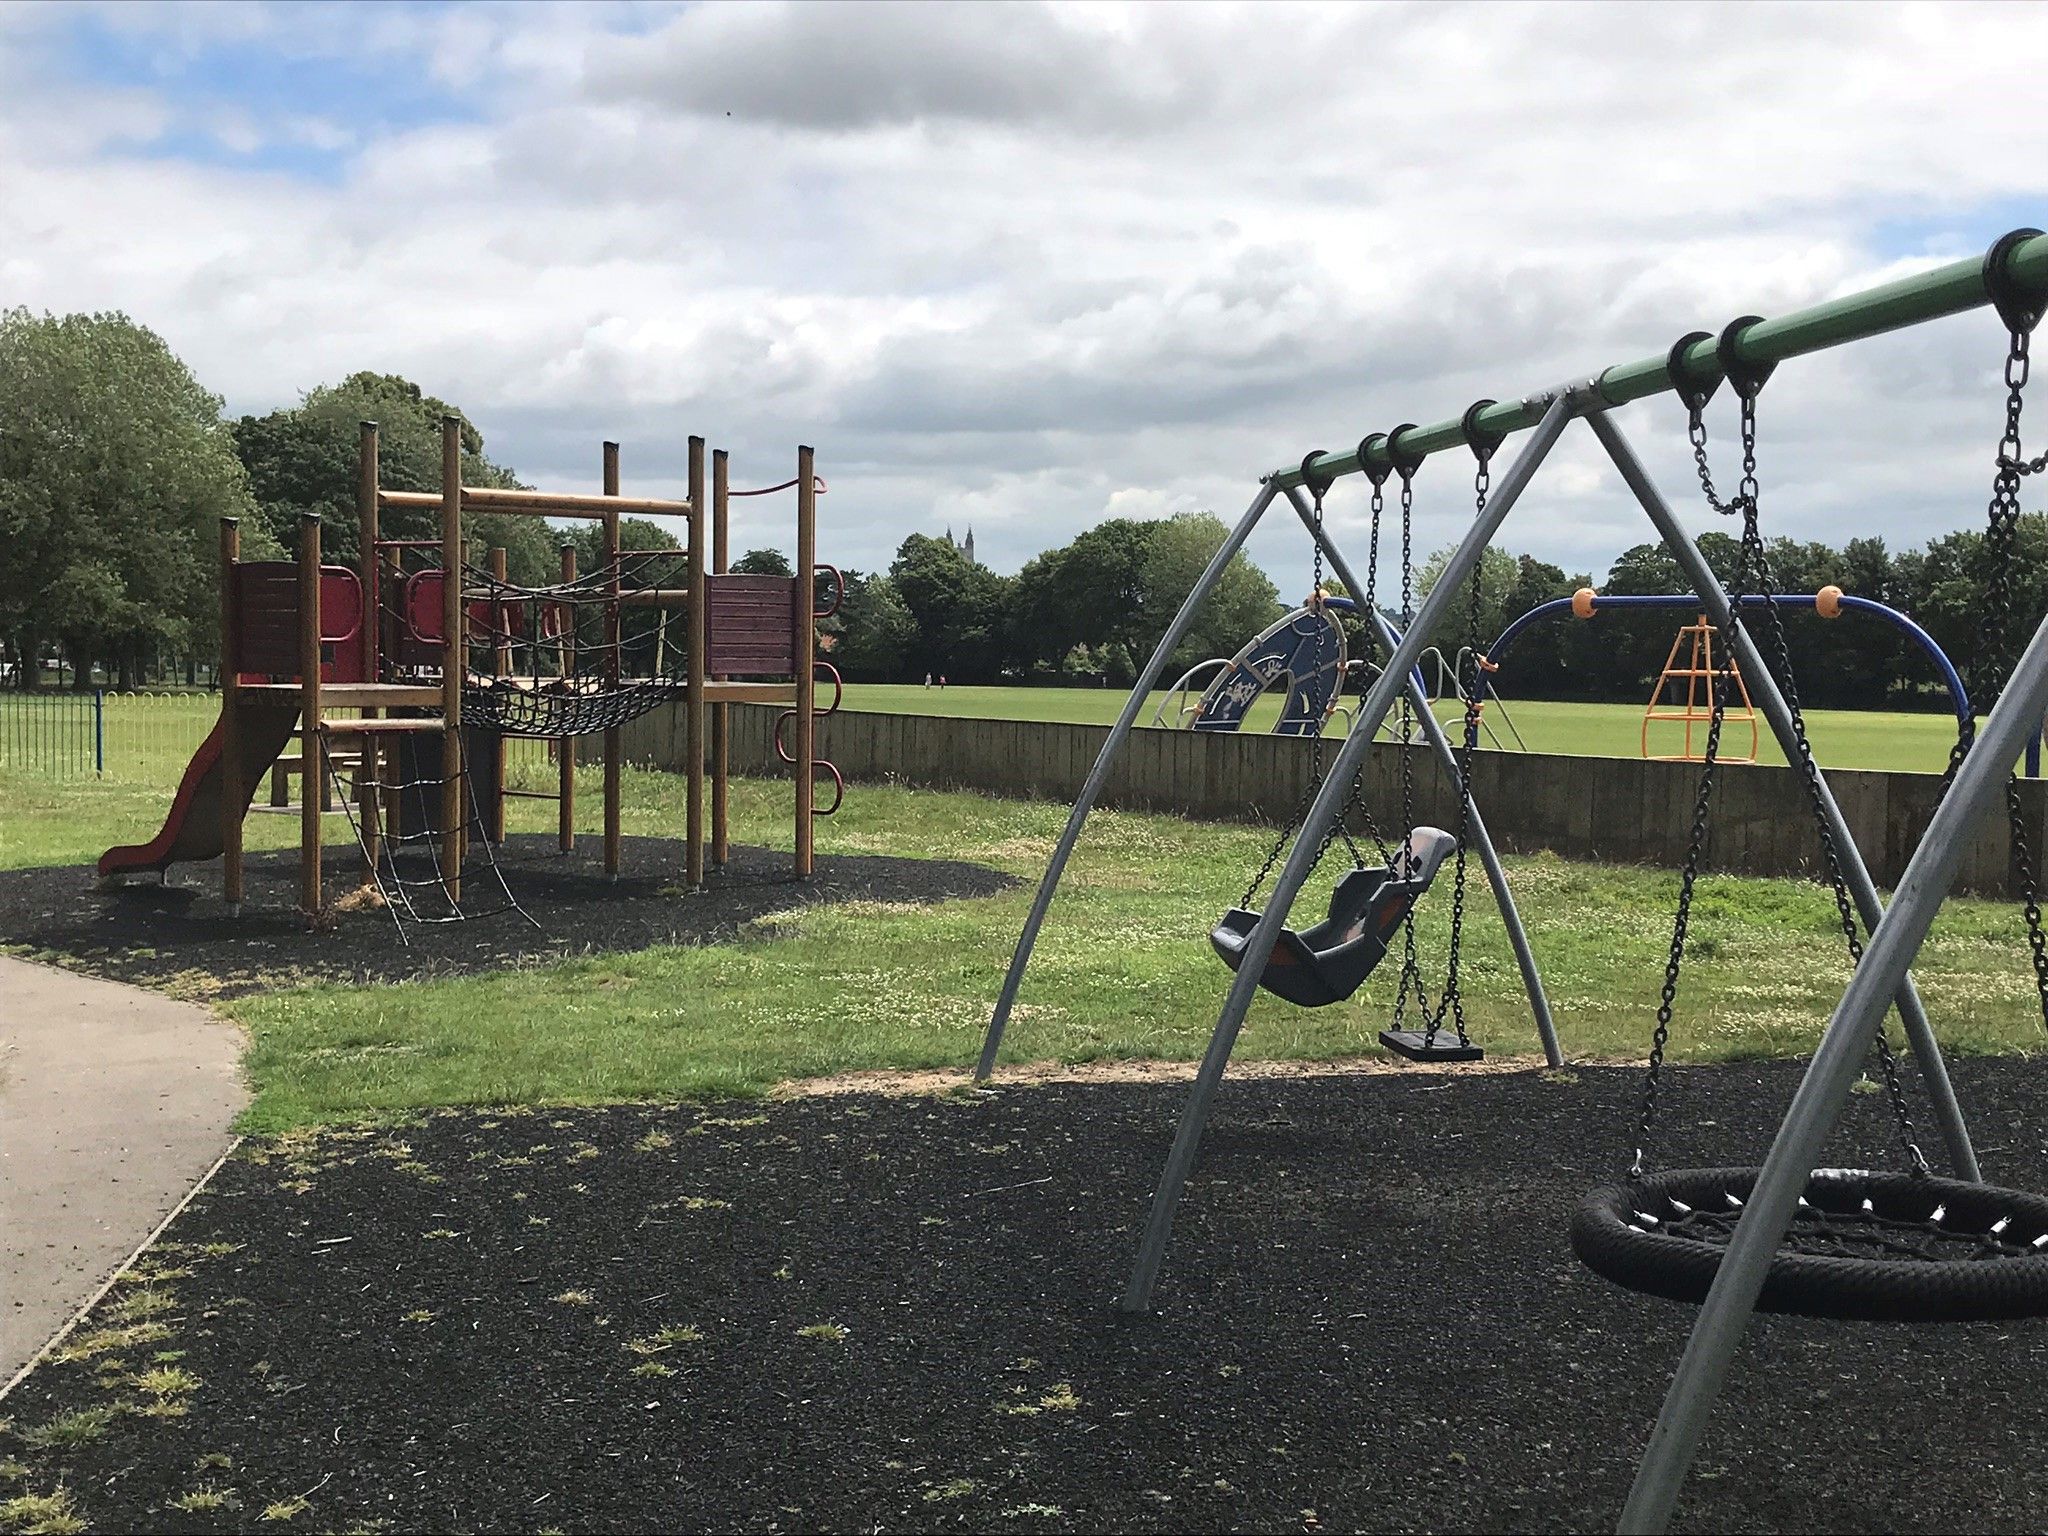 accessible swings and larger climbing frame in the background.